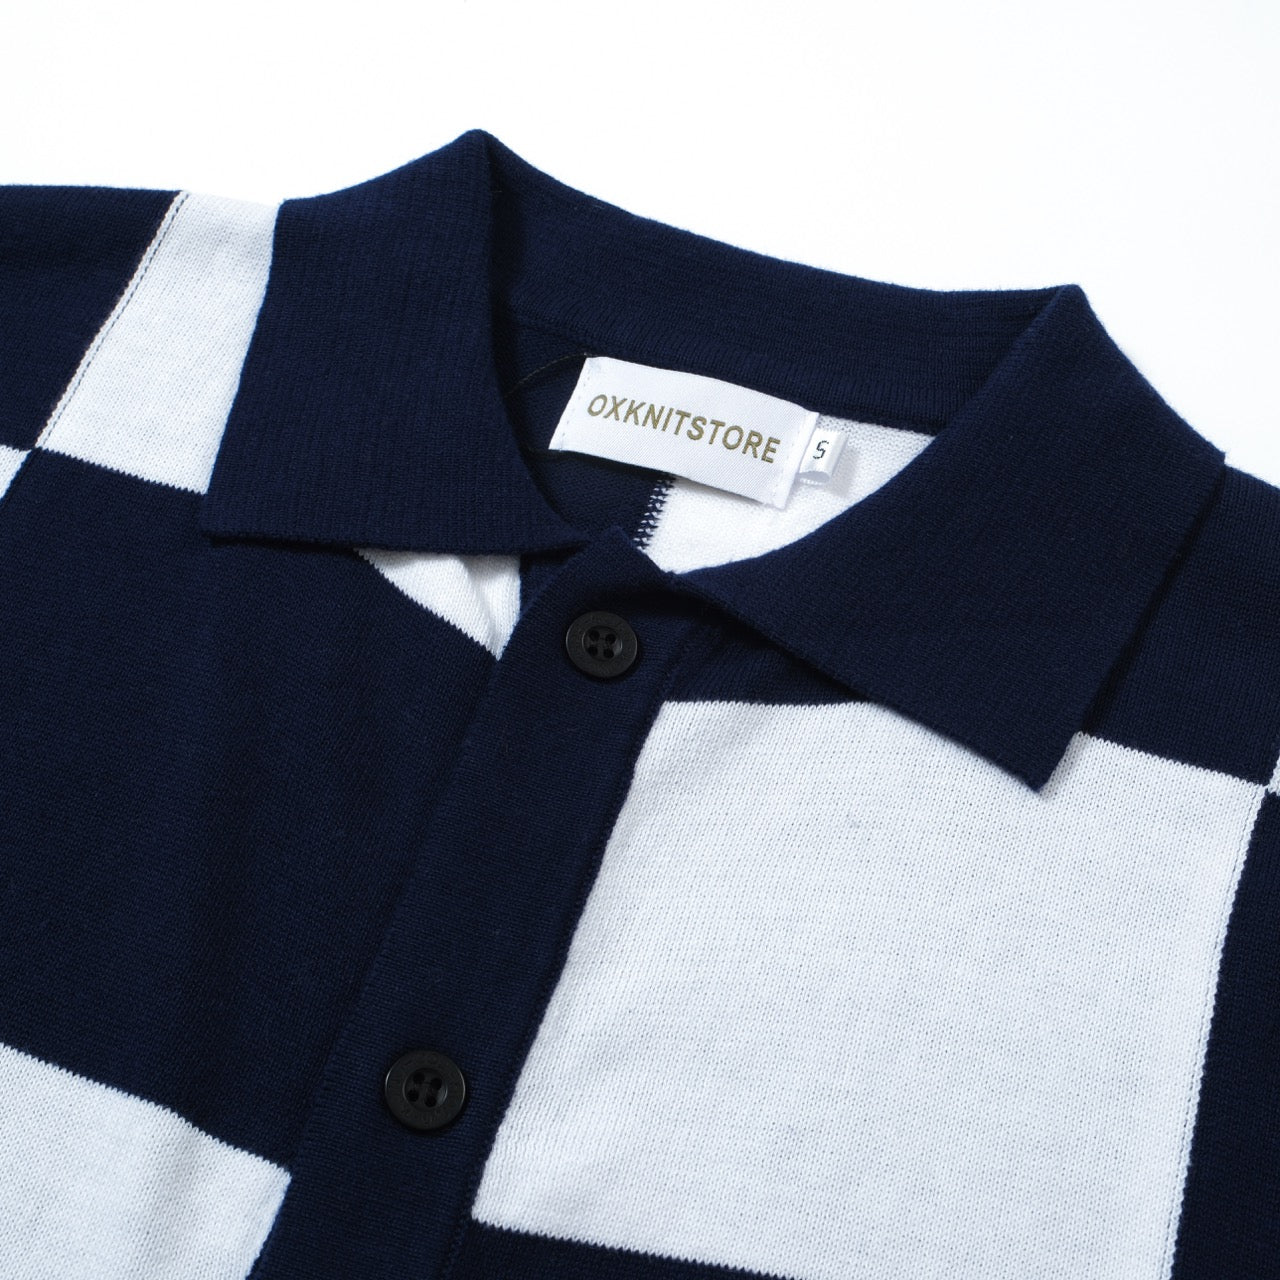 OXKNIT Men Vintage Clothing 1960s Mod Style Casual Navy Checkerboard Knitted Retro Polo Shirt